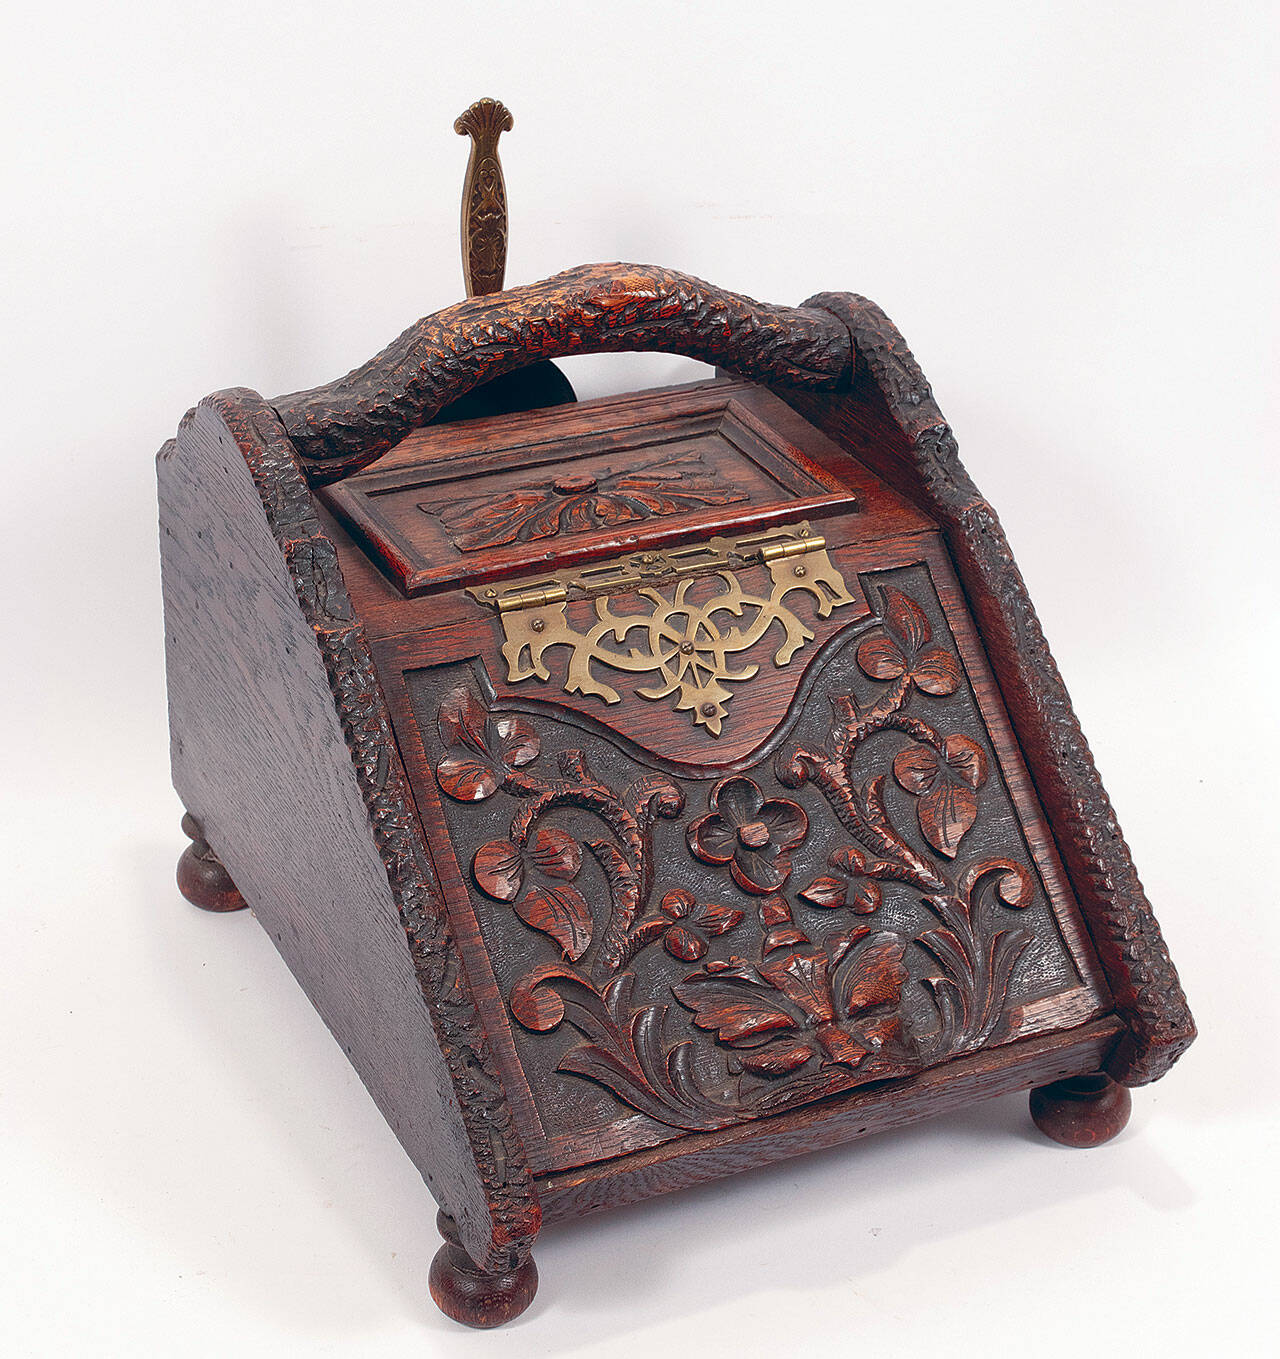 A coal scuttle wasn’t always used for coal; it could hold logs or collect ashes. This one from about 1900 sold for $125 at DuMouchelles in Detroit. (Cowles Syndicate Inc.)